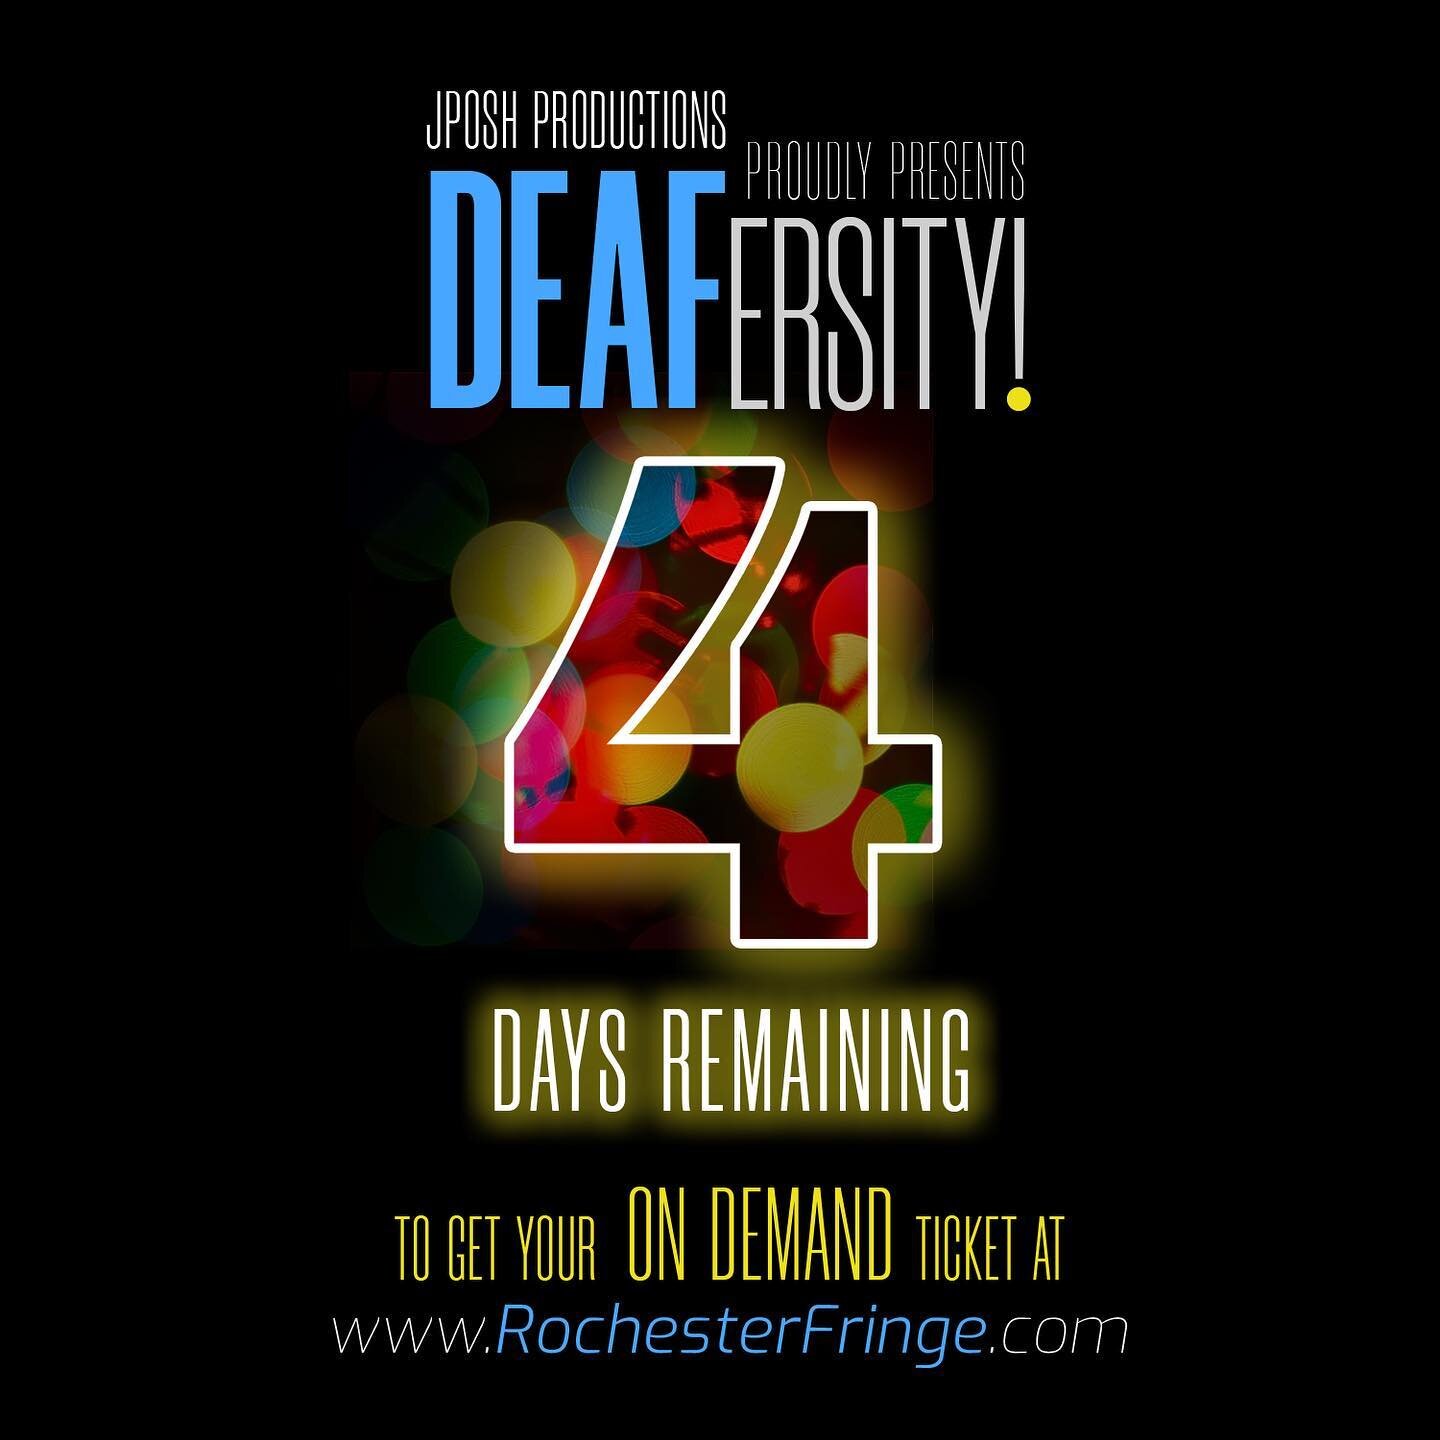 This is the last week to purchase tickets and celebrate International  Week of the Deaf with us as JPosh Productions proudly presents DEAFersity! and joins the 2020 Virtual Rochester Fringe Festival vía On Demand.

Tickets are only AVAILABLE for FOU